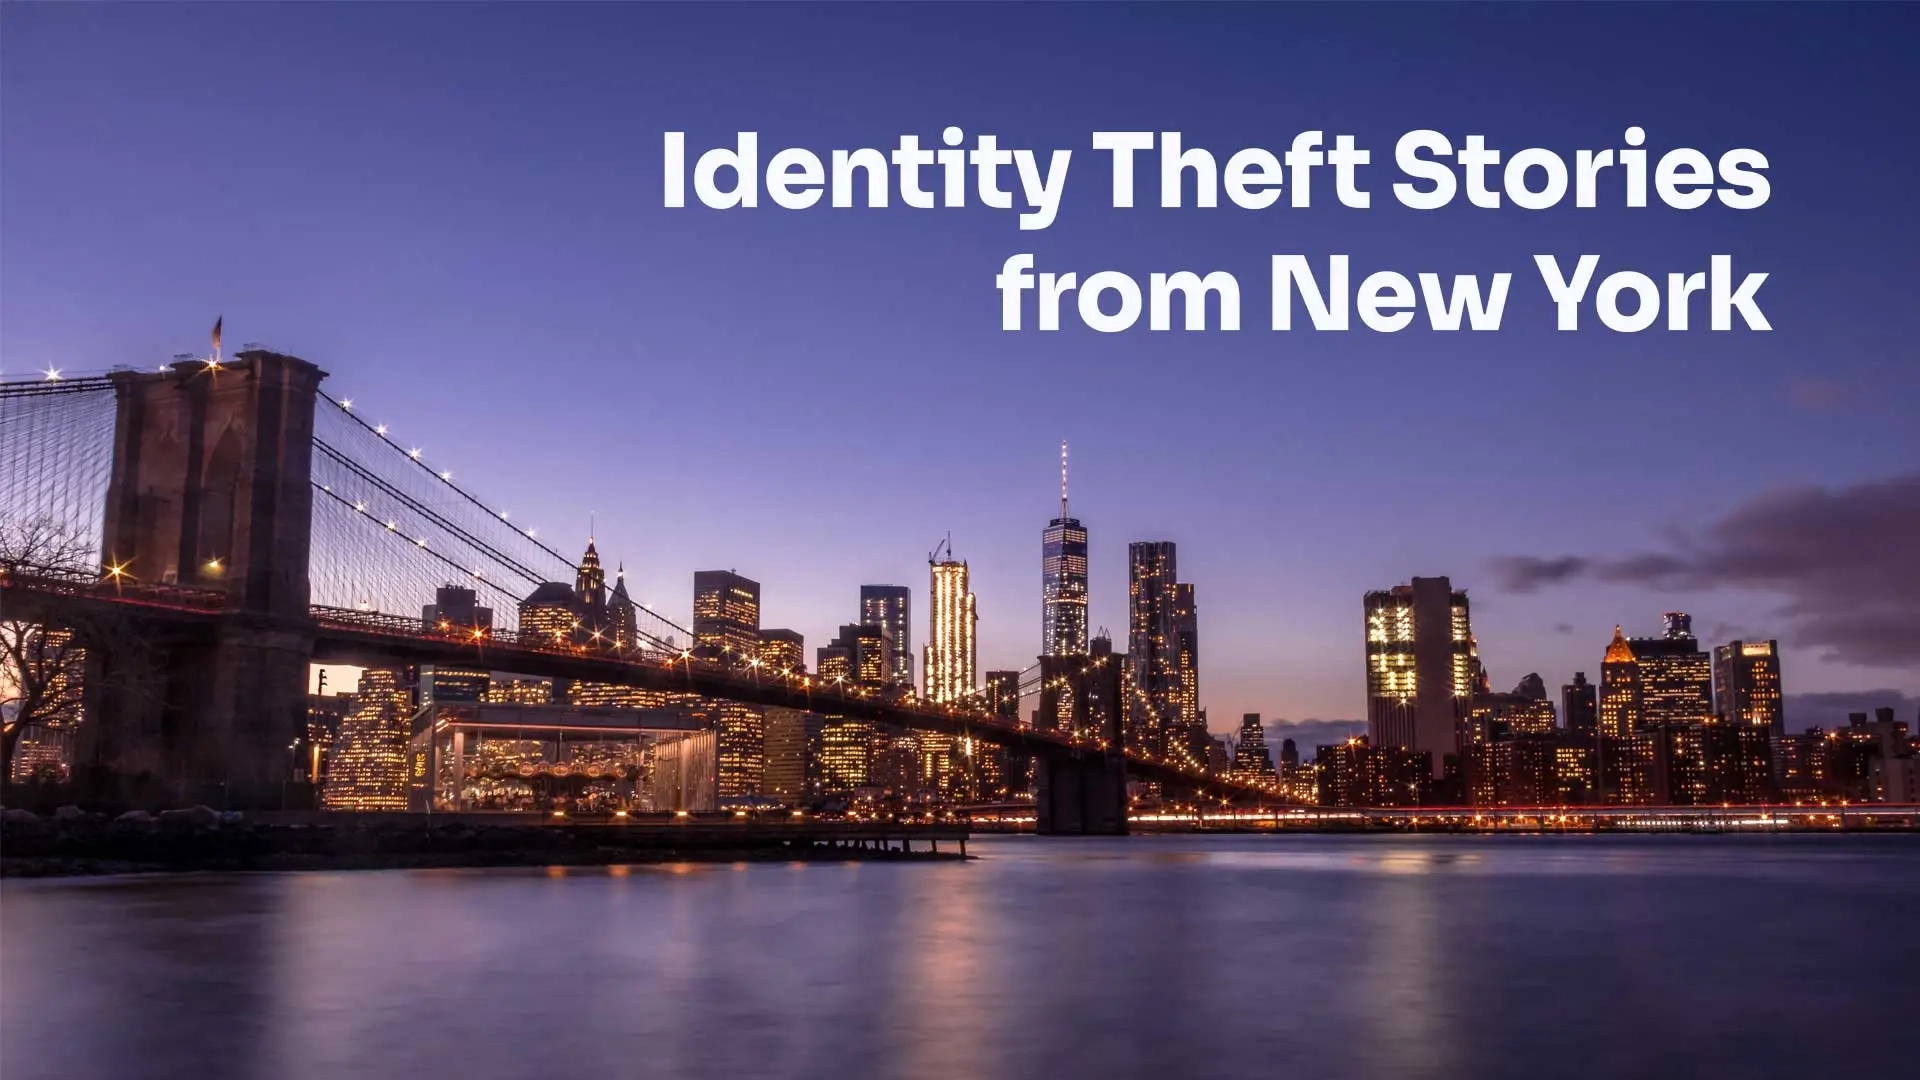 New York landscape with Identity Theft sign